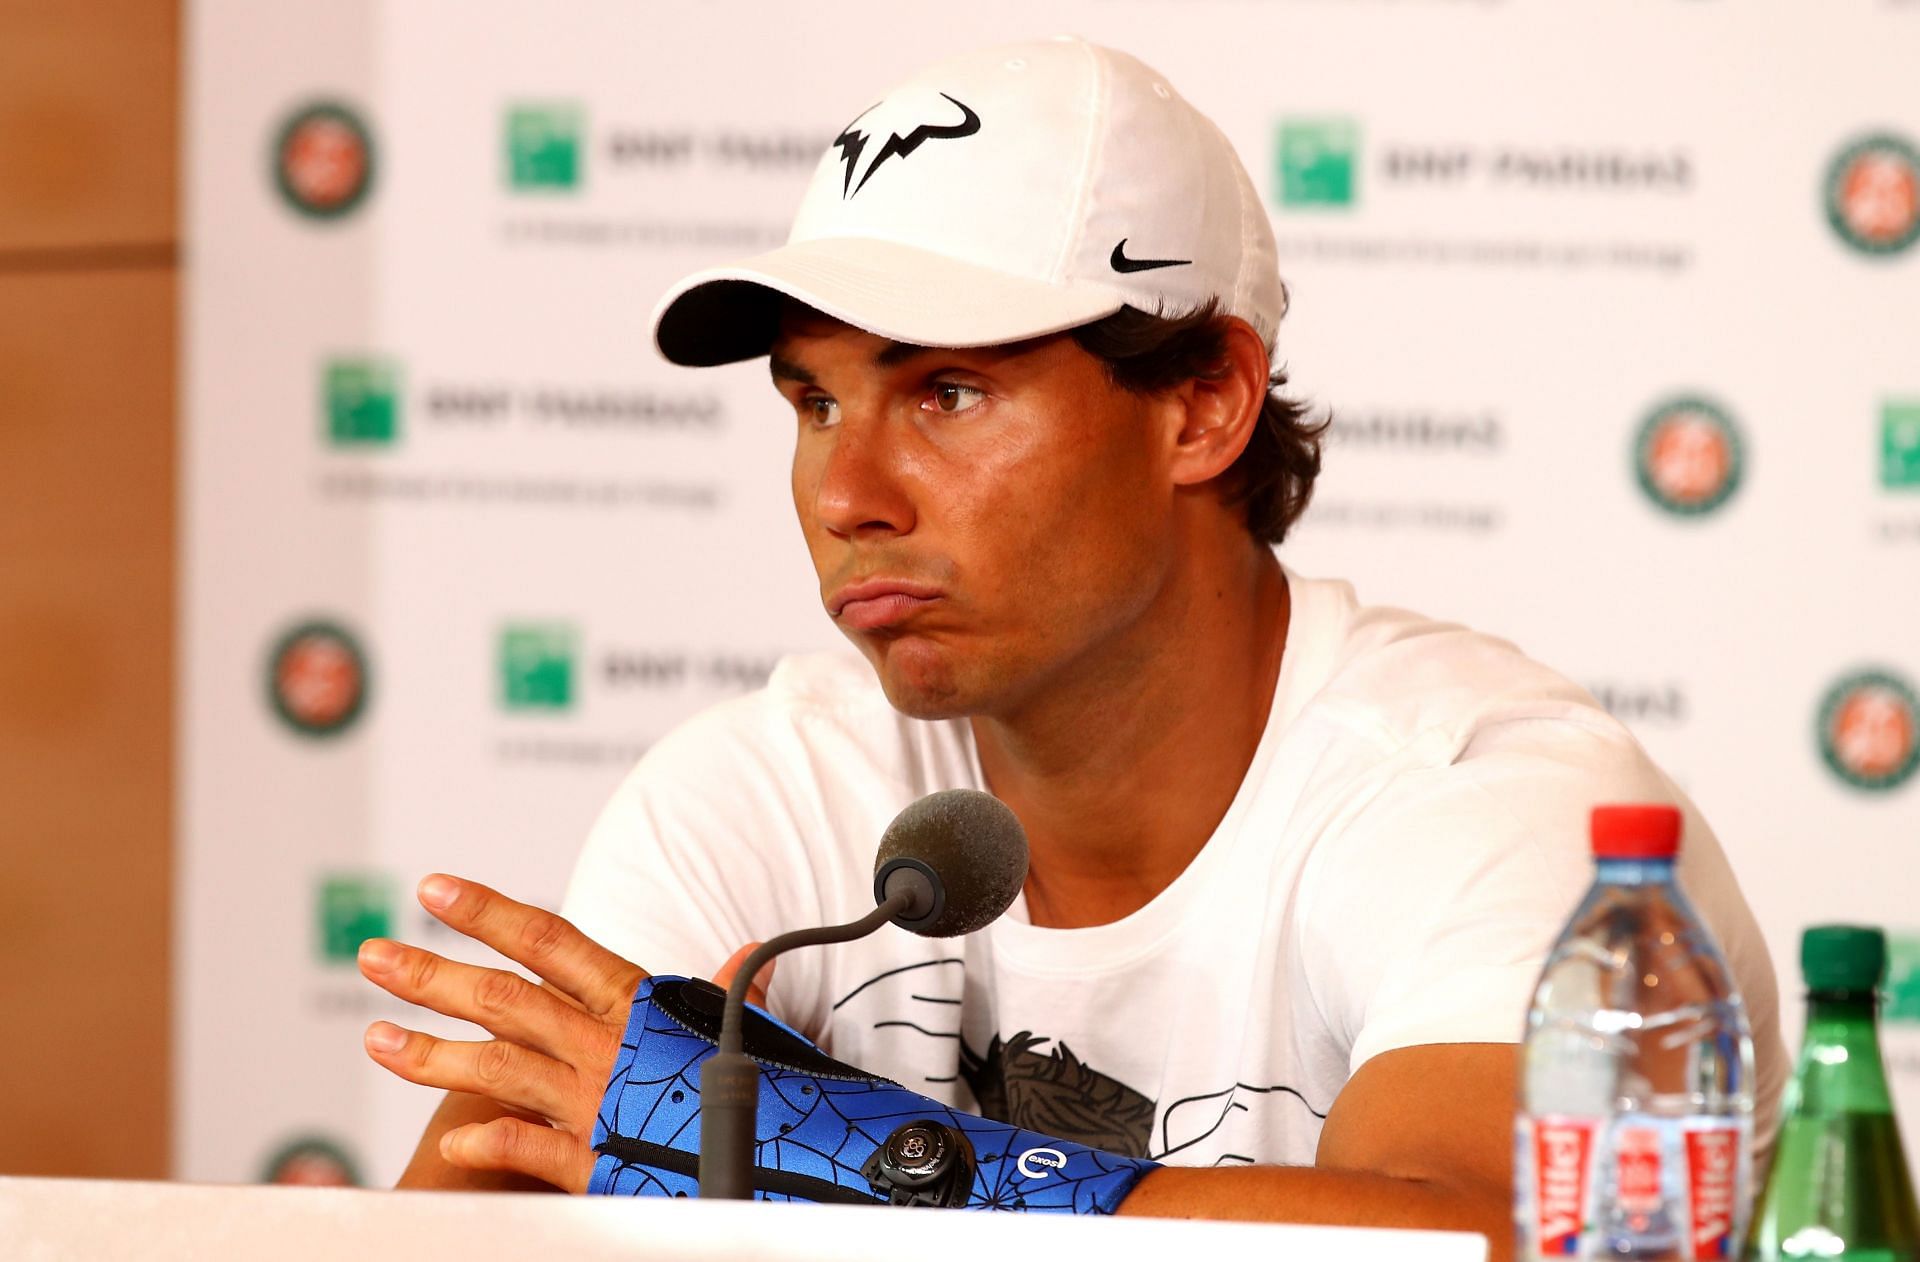 Rafael Nadal&#039;s press conference provided an insight into his mental state at this year&#039;s French Open.